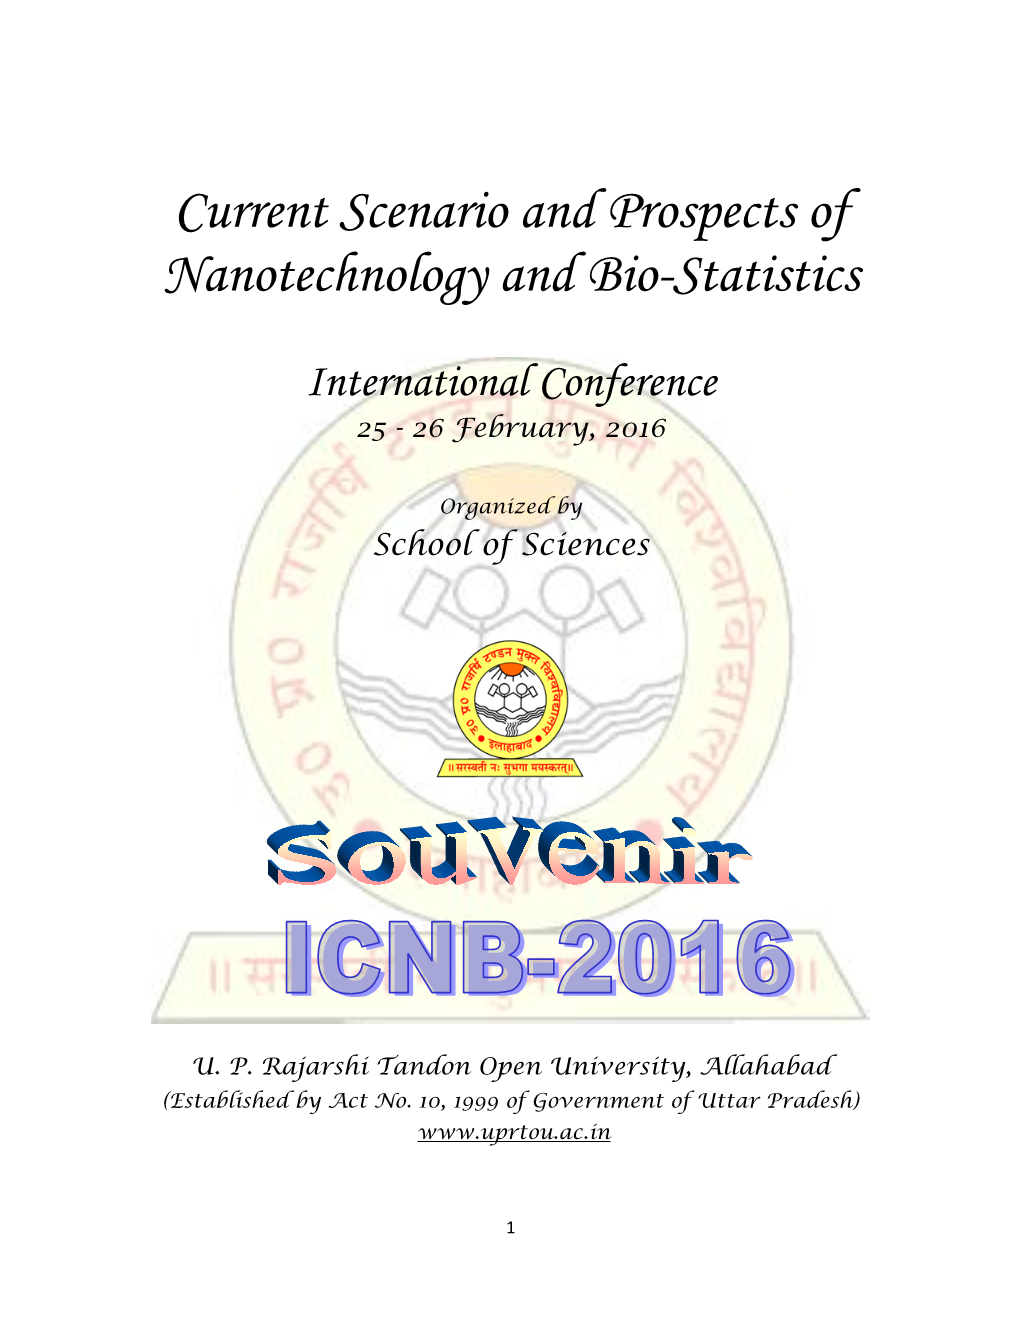 Current Scenario and Prospects of Nanotechnology and Bio-Statistics